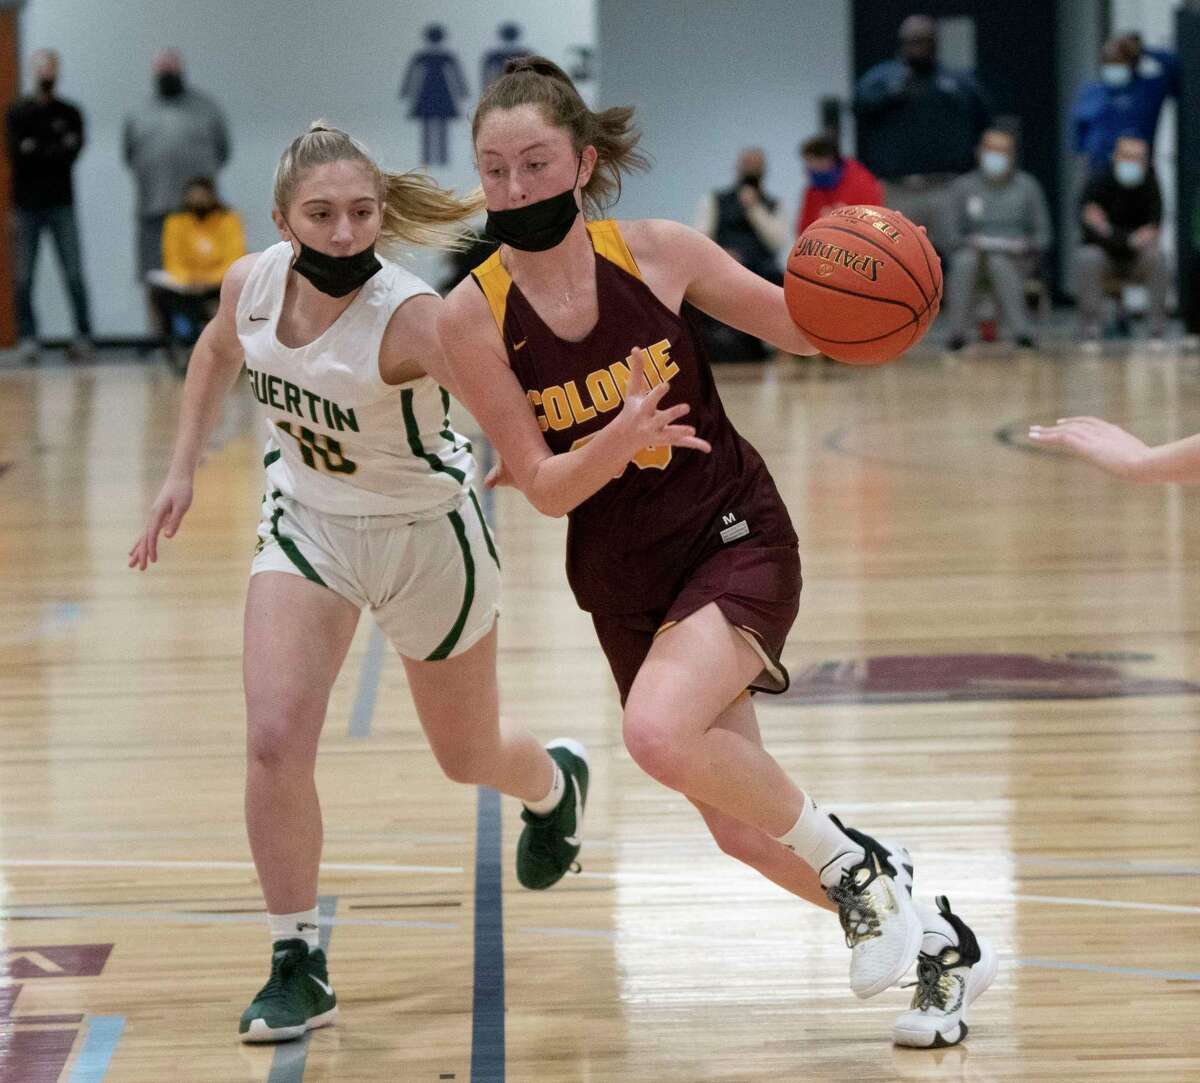 Colonie's Macie Trimarchi drives to the basket during a basketball game against Bishop Guertin at the Impact Athletic Center on Wednesday, Dec. 29, 2021 in Halfmoon, N.Y.